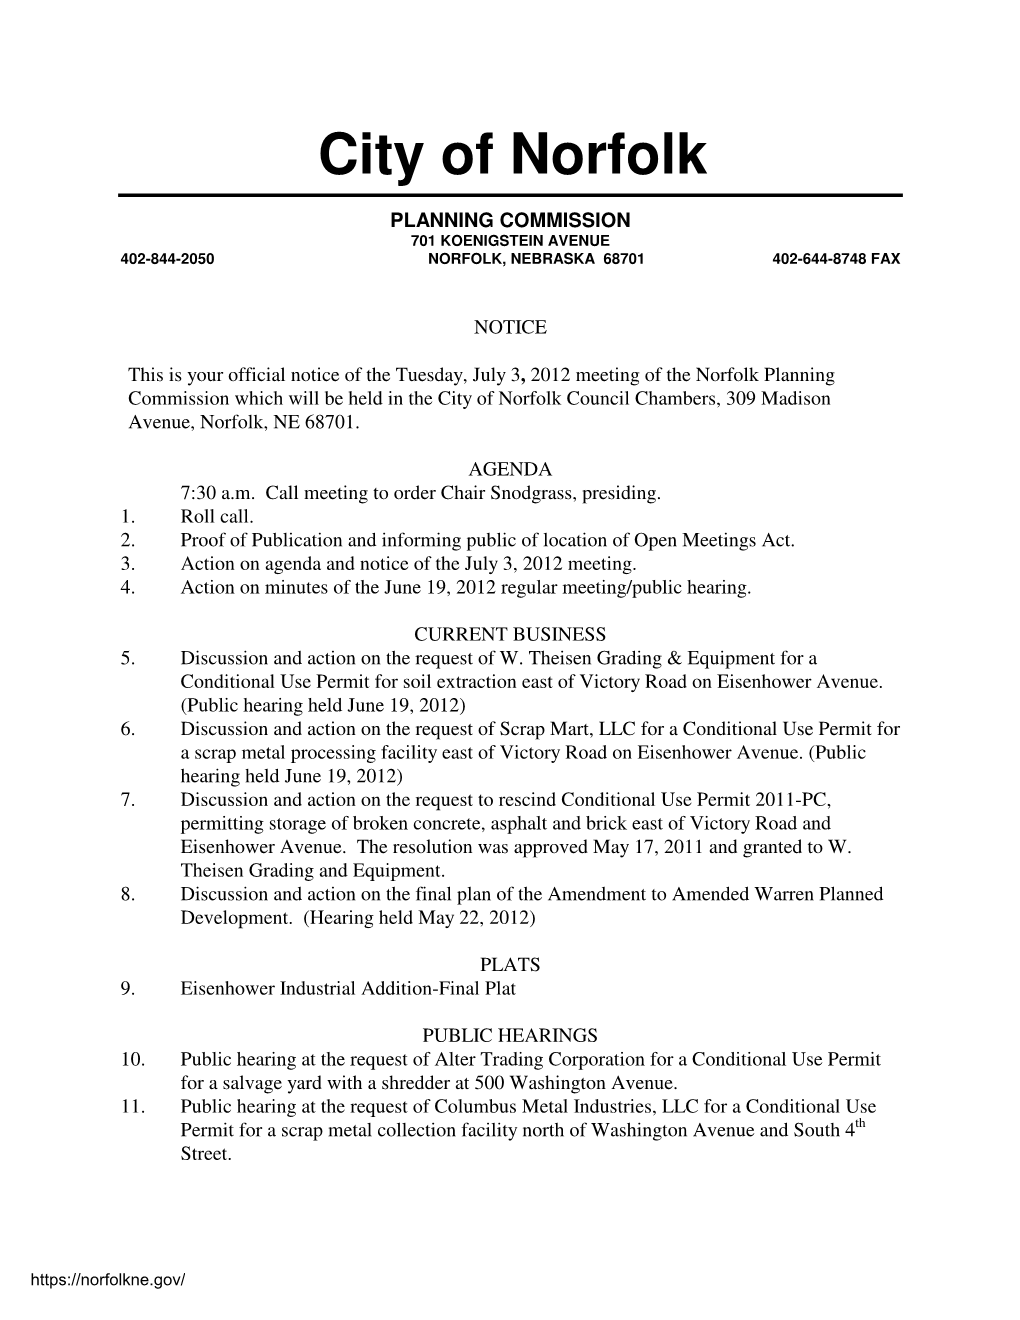 Planning Commission Agenda Packet July 03, 2012